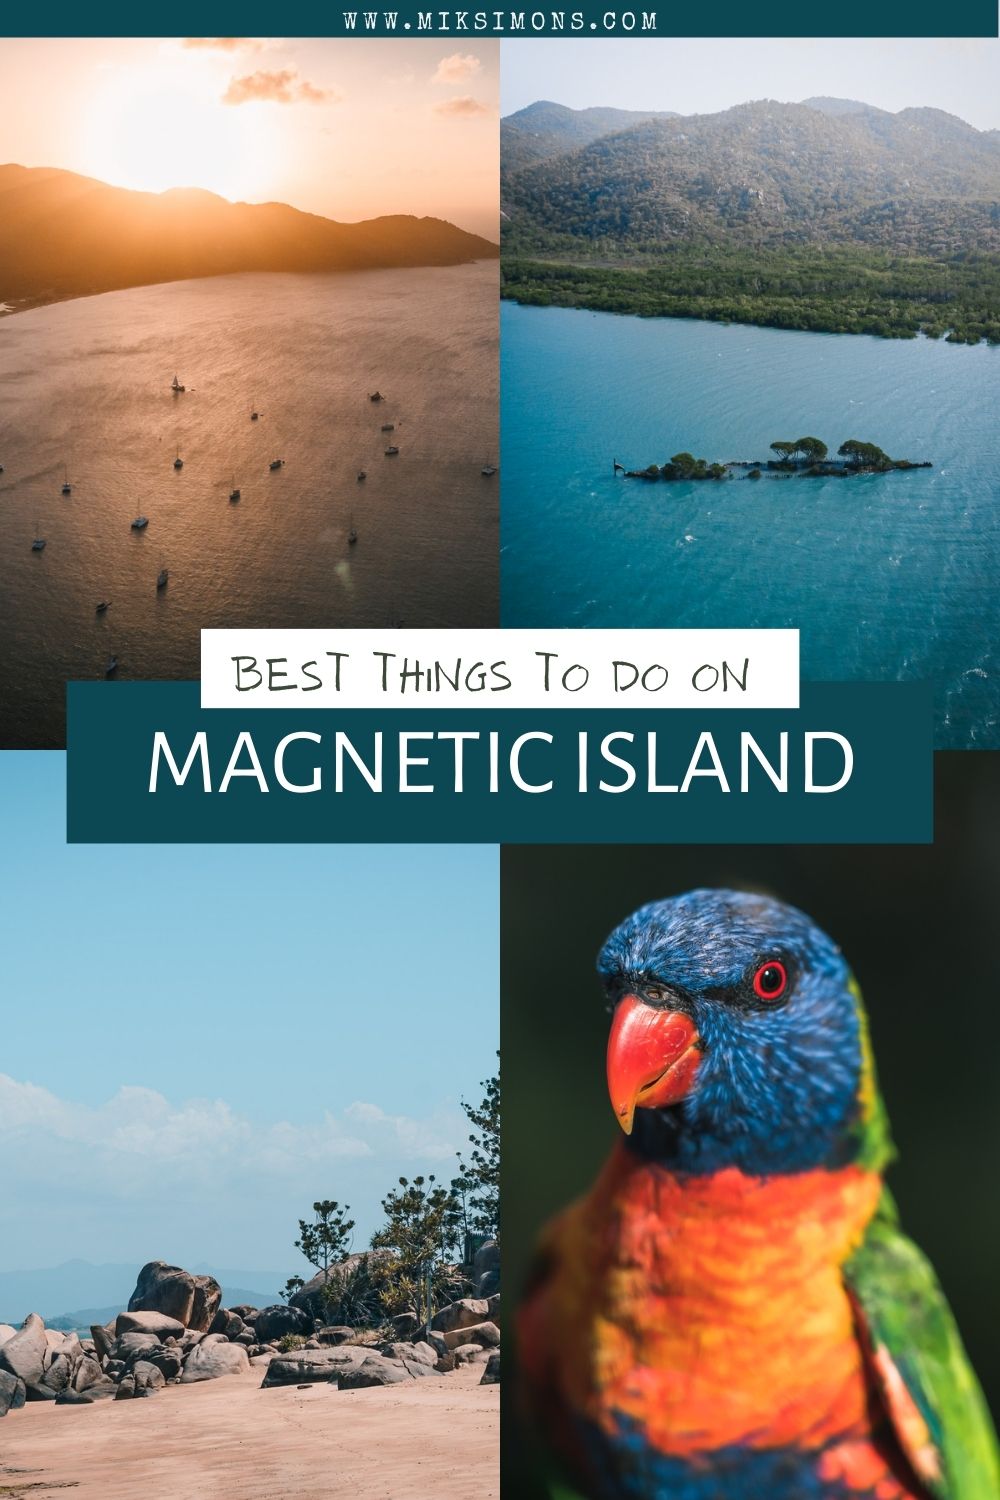 9 best things to do on Magnetic Island